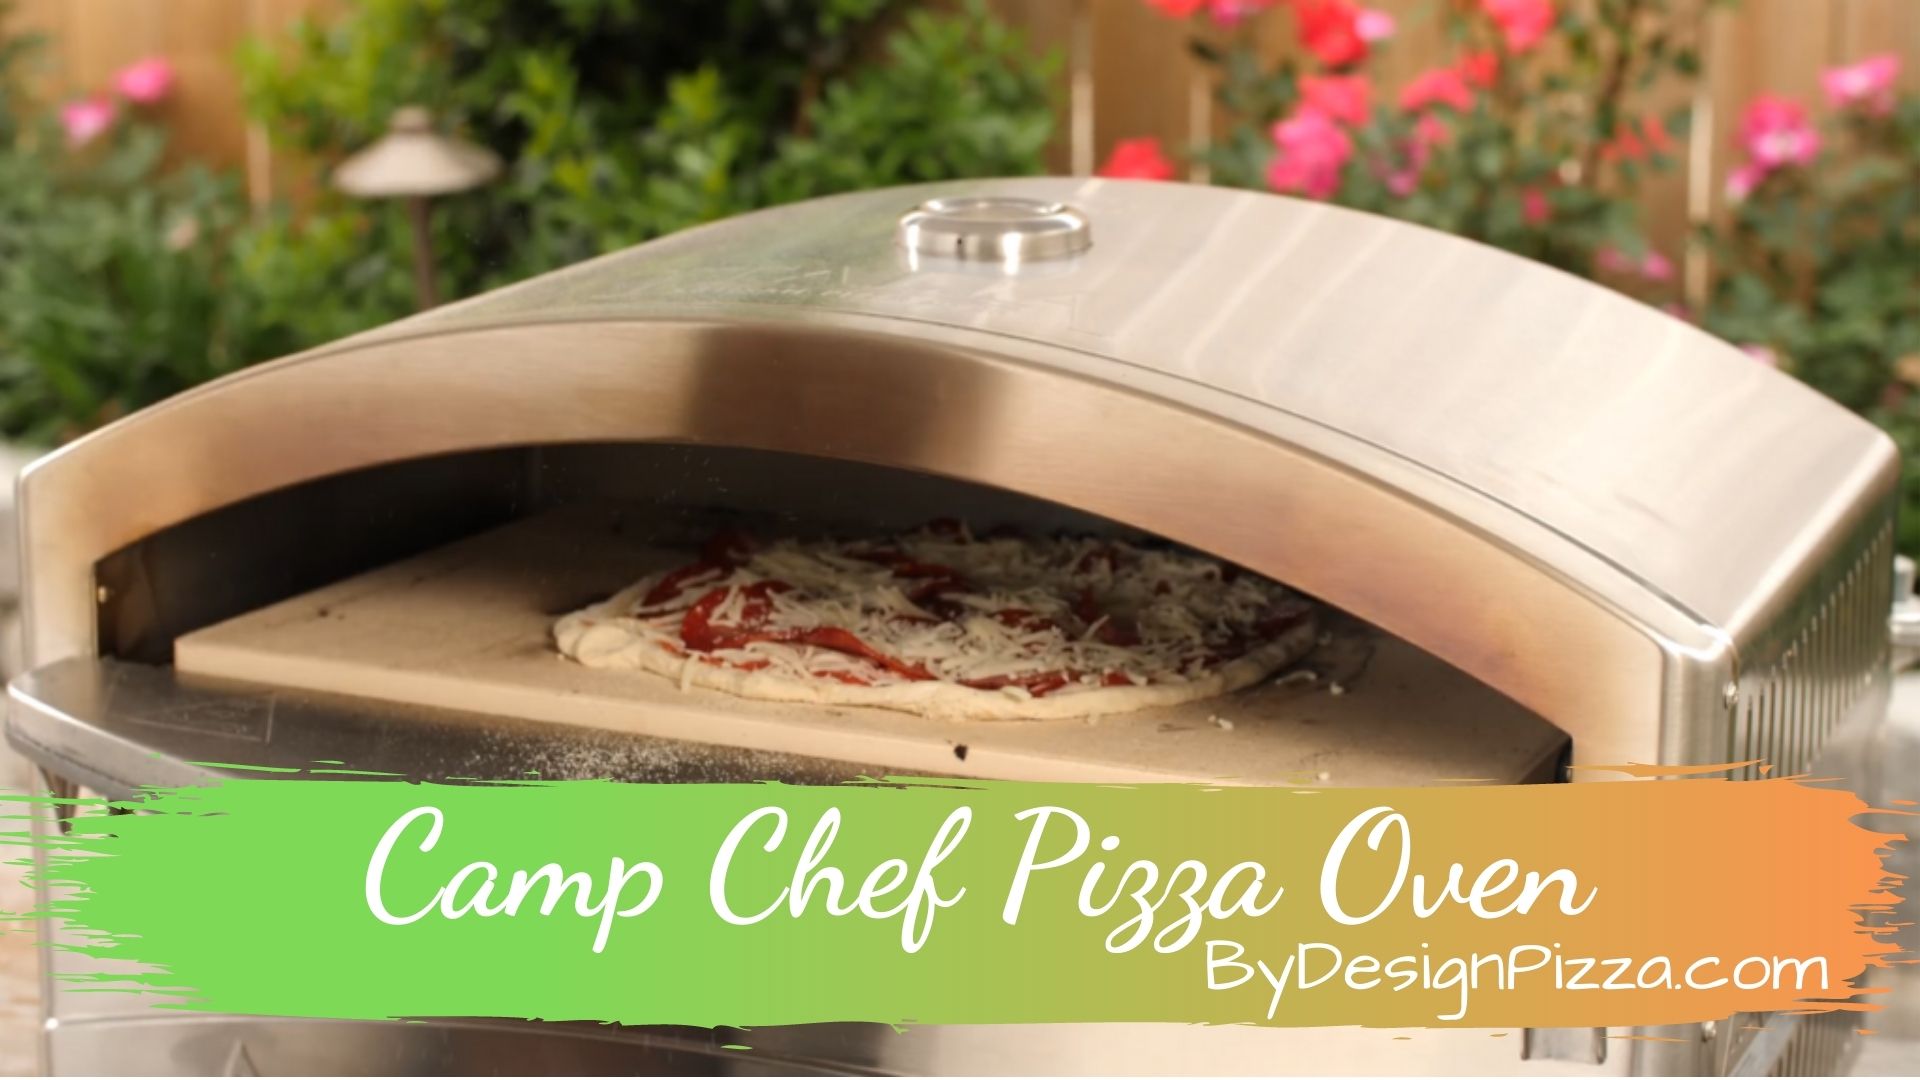 What Makes A Camp Chef Pizza Oven Special?